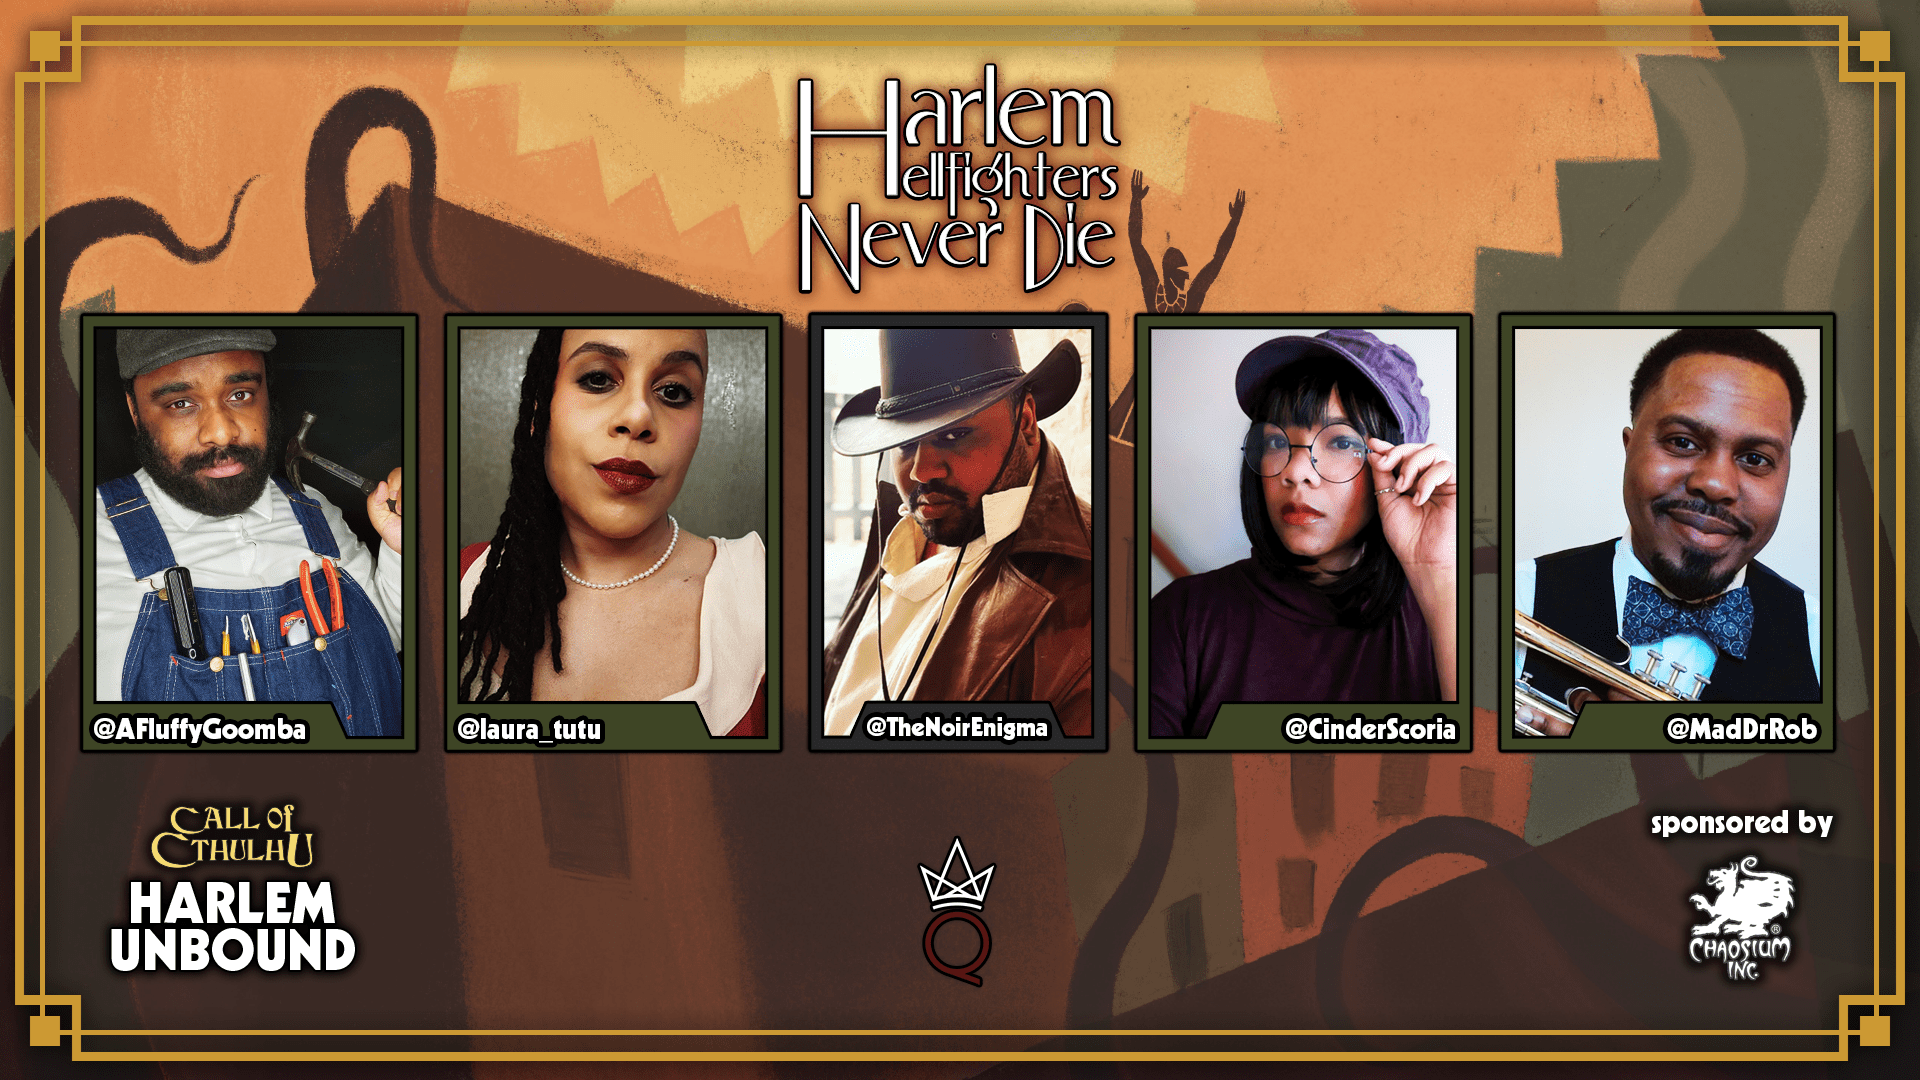 The cast of Harlem Hellfighters Neber Die

from left to right:
@Afluffygoomba
@laura_tutu
@TheNoirEnigma
@CinderScoria
@MadDrRob